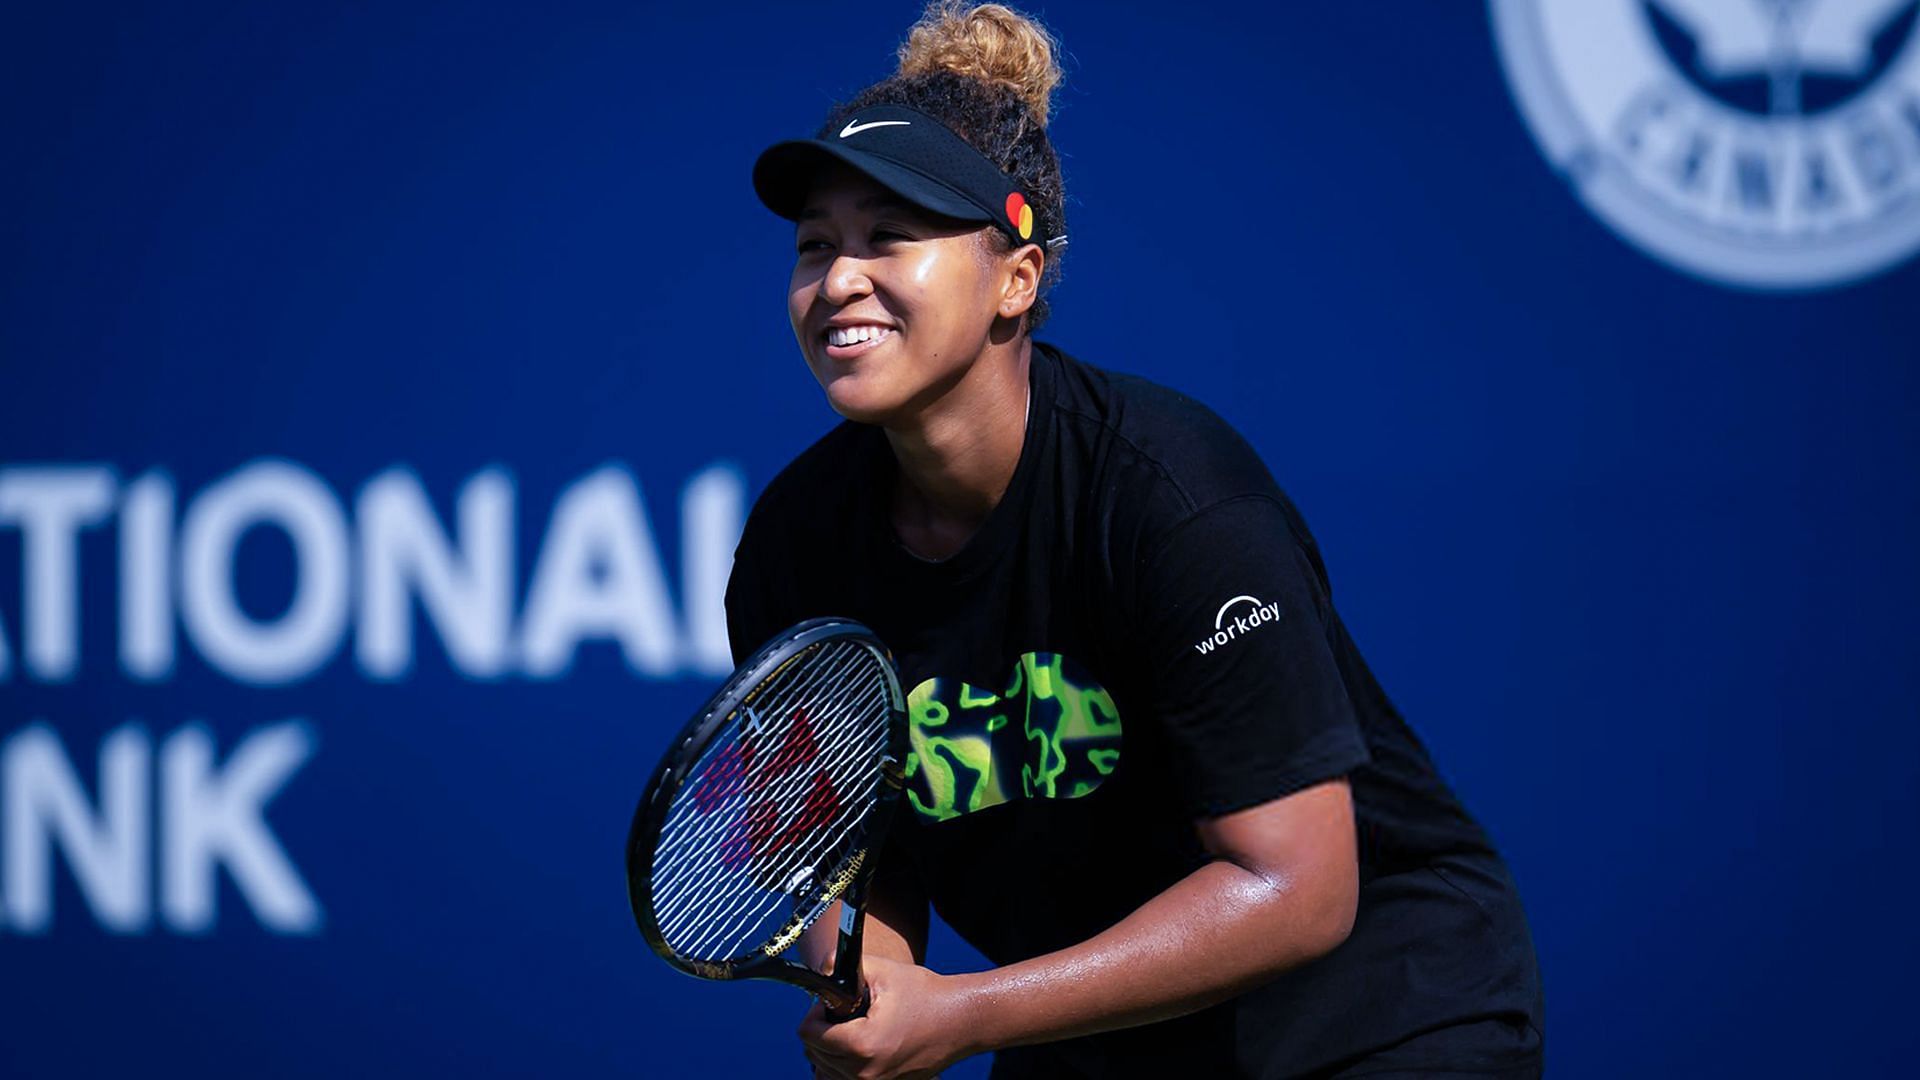 Naomi Osaka finds humor in her training mishap after comically missing a shot